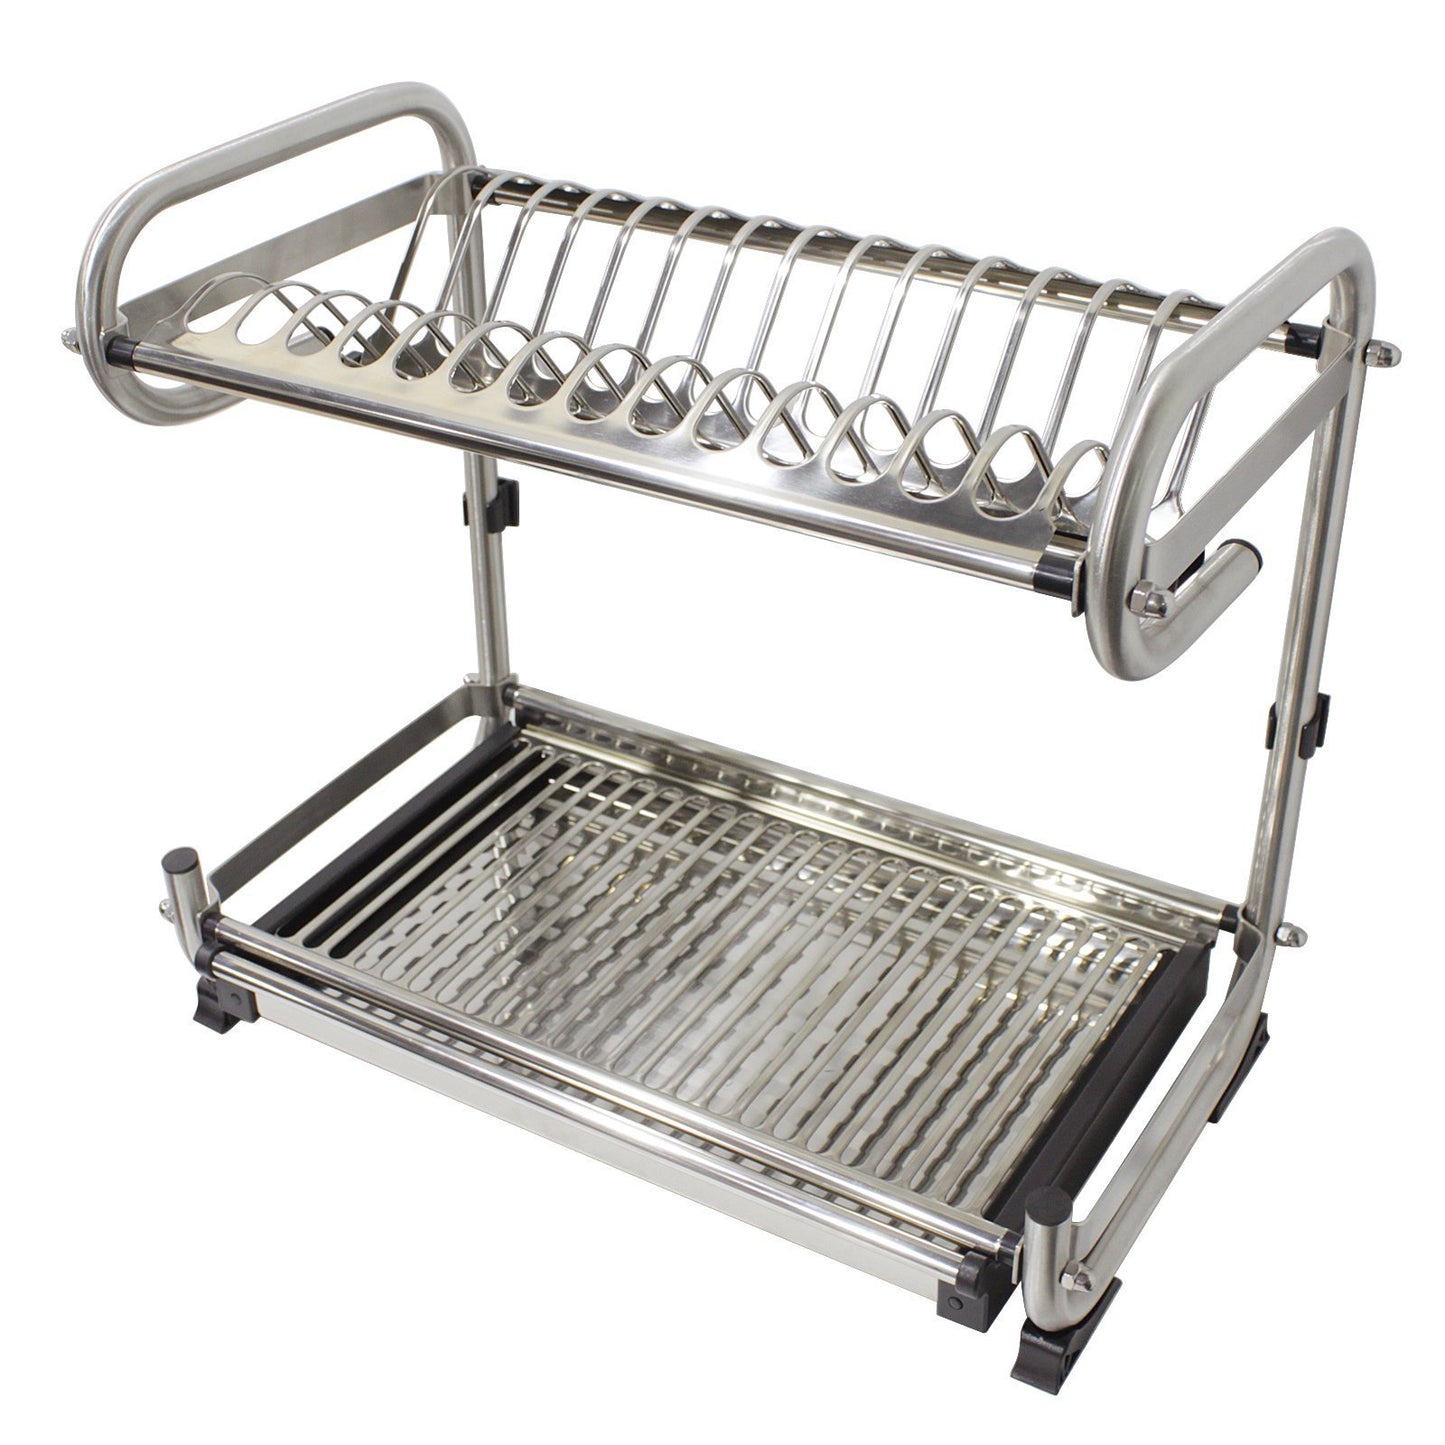 Purchase probrico dish rack 2 tier 304 stainless steel dry shelf kitchen dishes bowls holder tidy stacking shelf 23 6 inch width